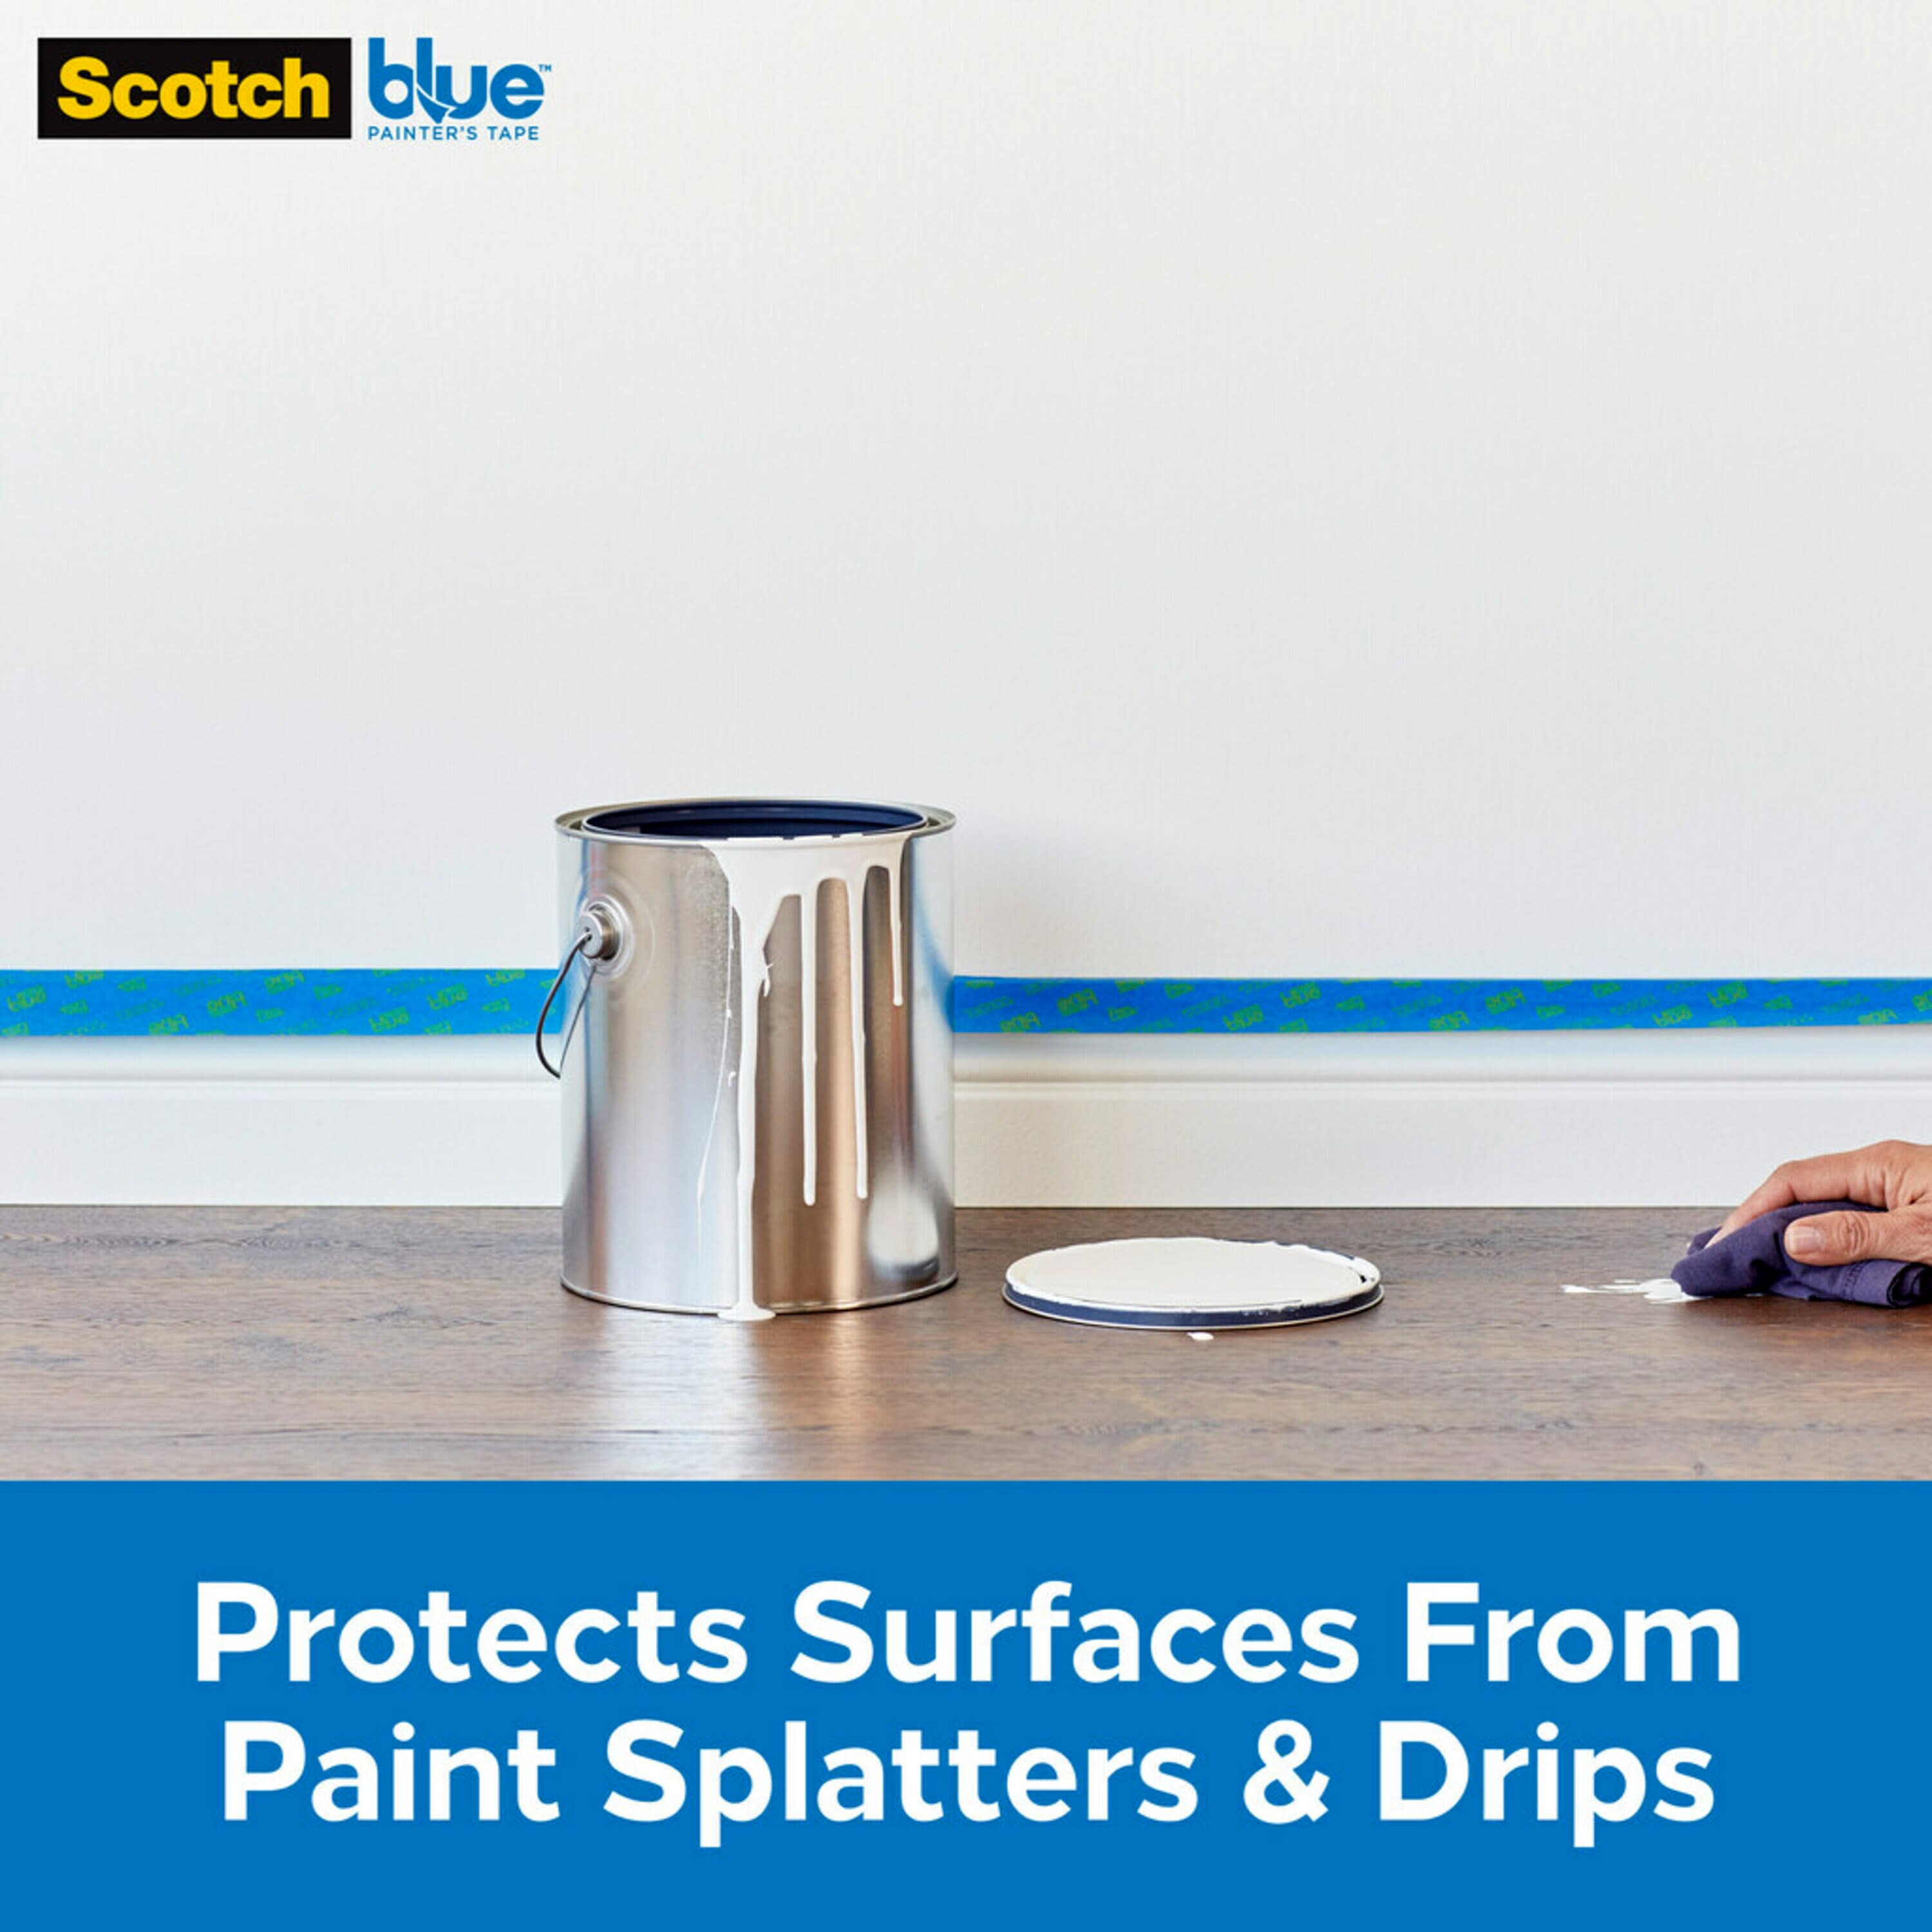 Shop ScotchBlue Paint Prep Essentials: ScotchBlue Painters Tape and  Applicator, Masking Film, and Color Changing Spackling Compound Kit at